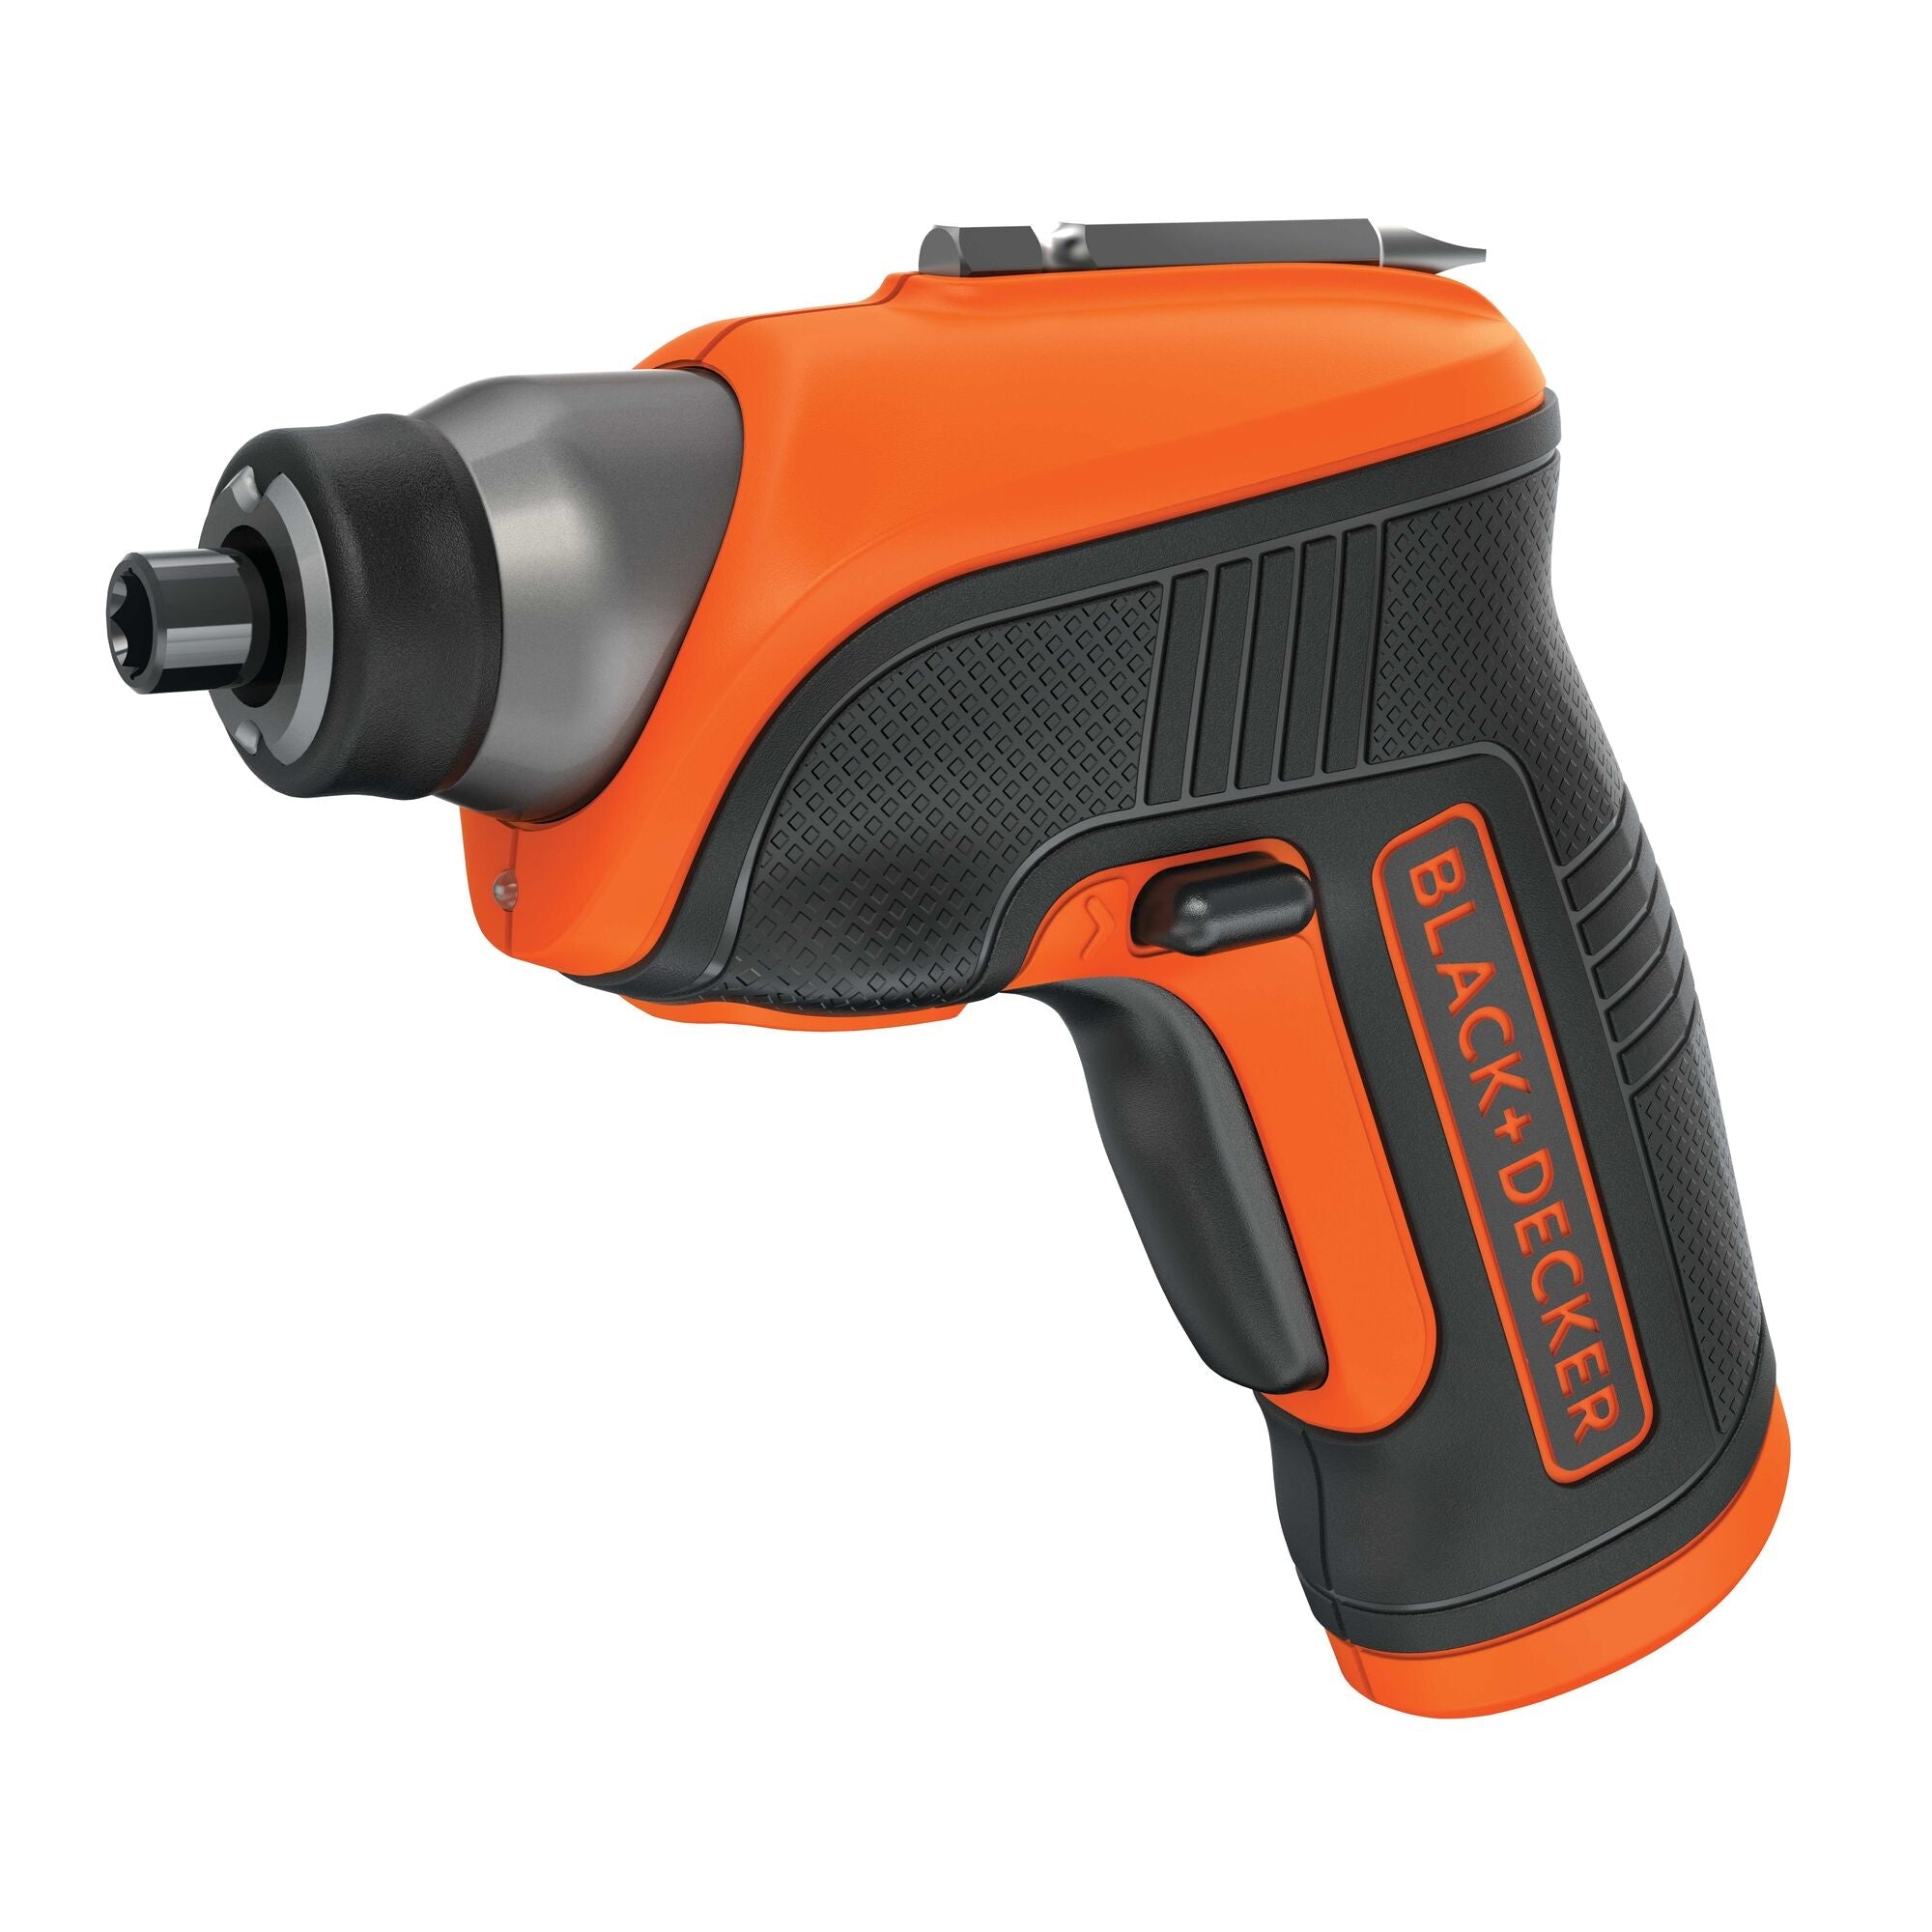 4V MAX* Cordless Screwdriver with LED Light